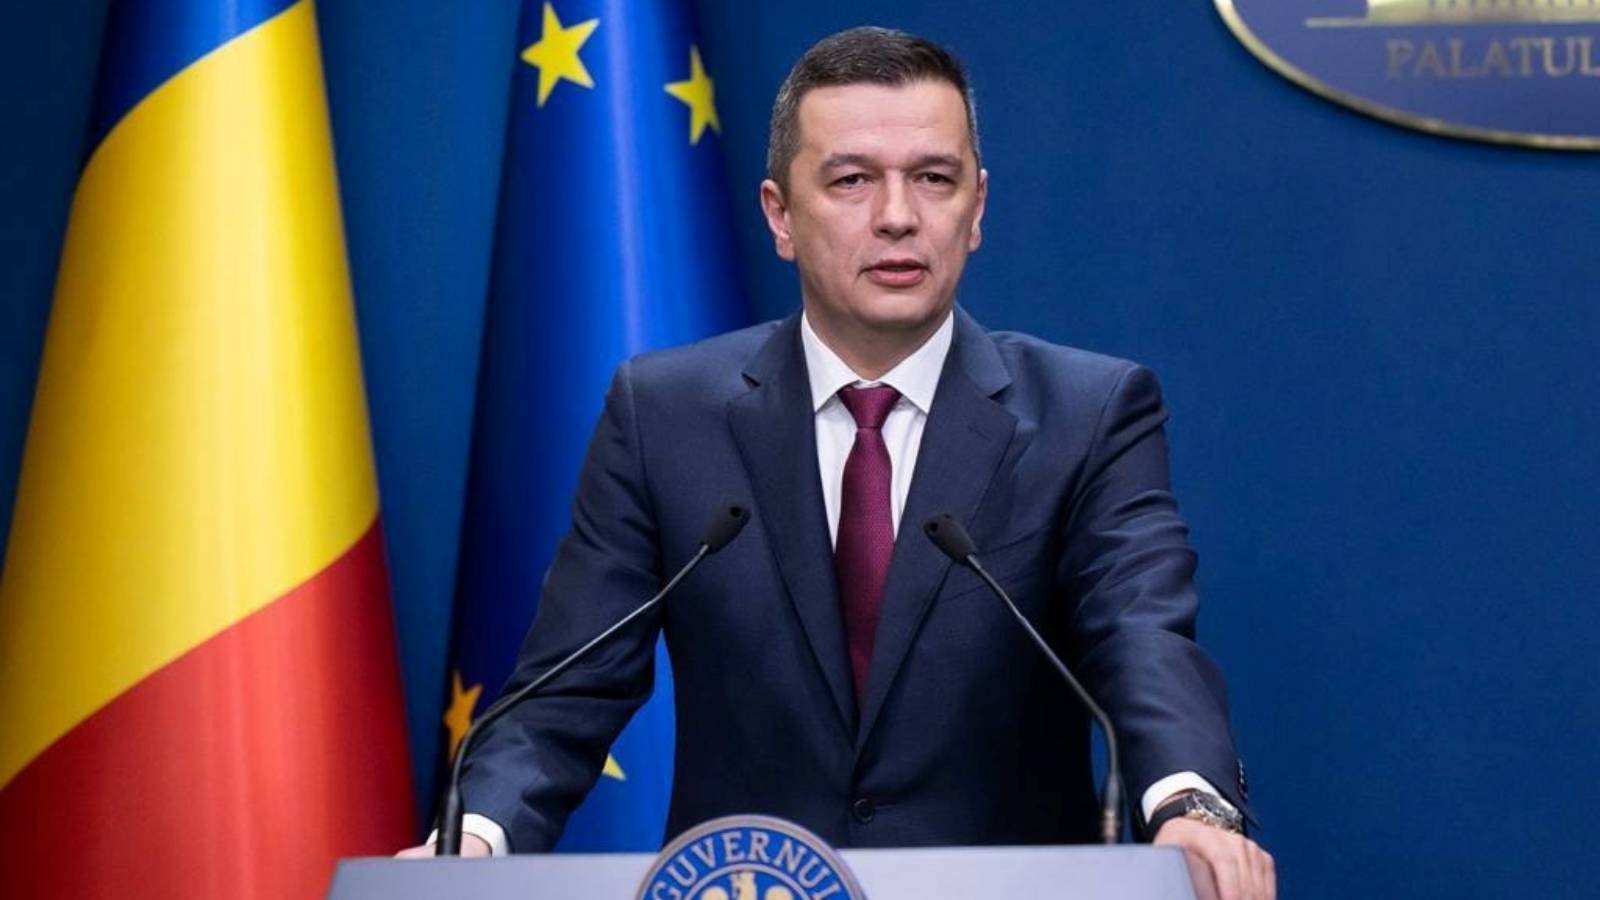 Sorin Grindeanu makes LAST TIME Announcements The Tragedy Enraged the Romanians